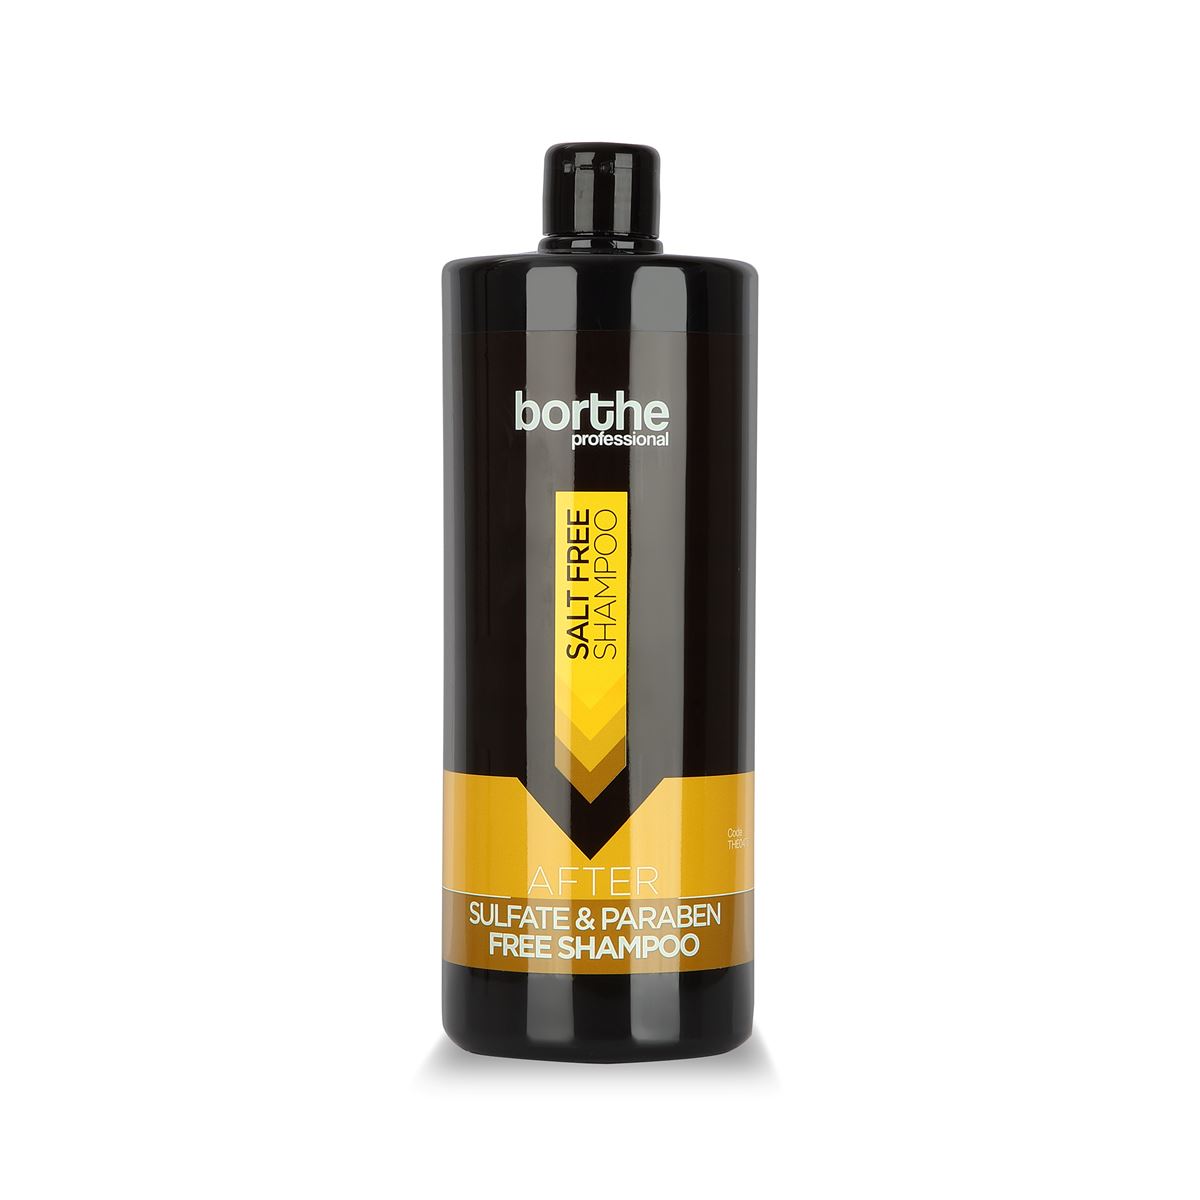 Borthe Sulfate & Paraben Free After Shapoo 1100 ml.